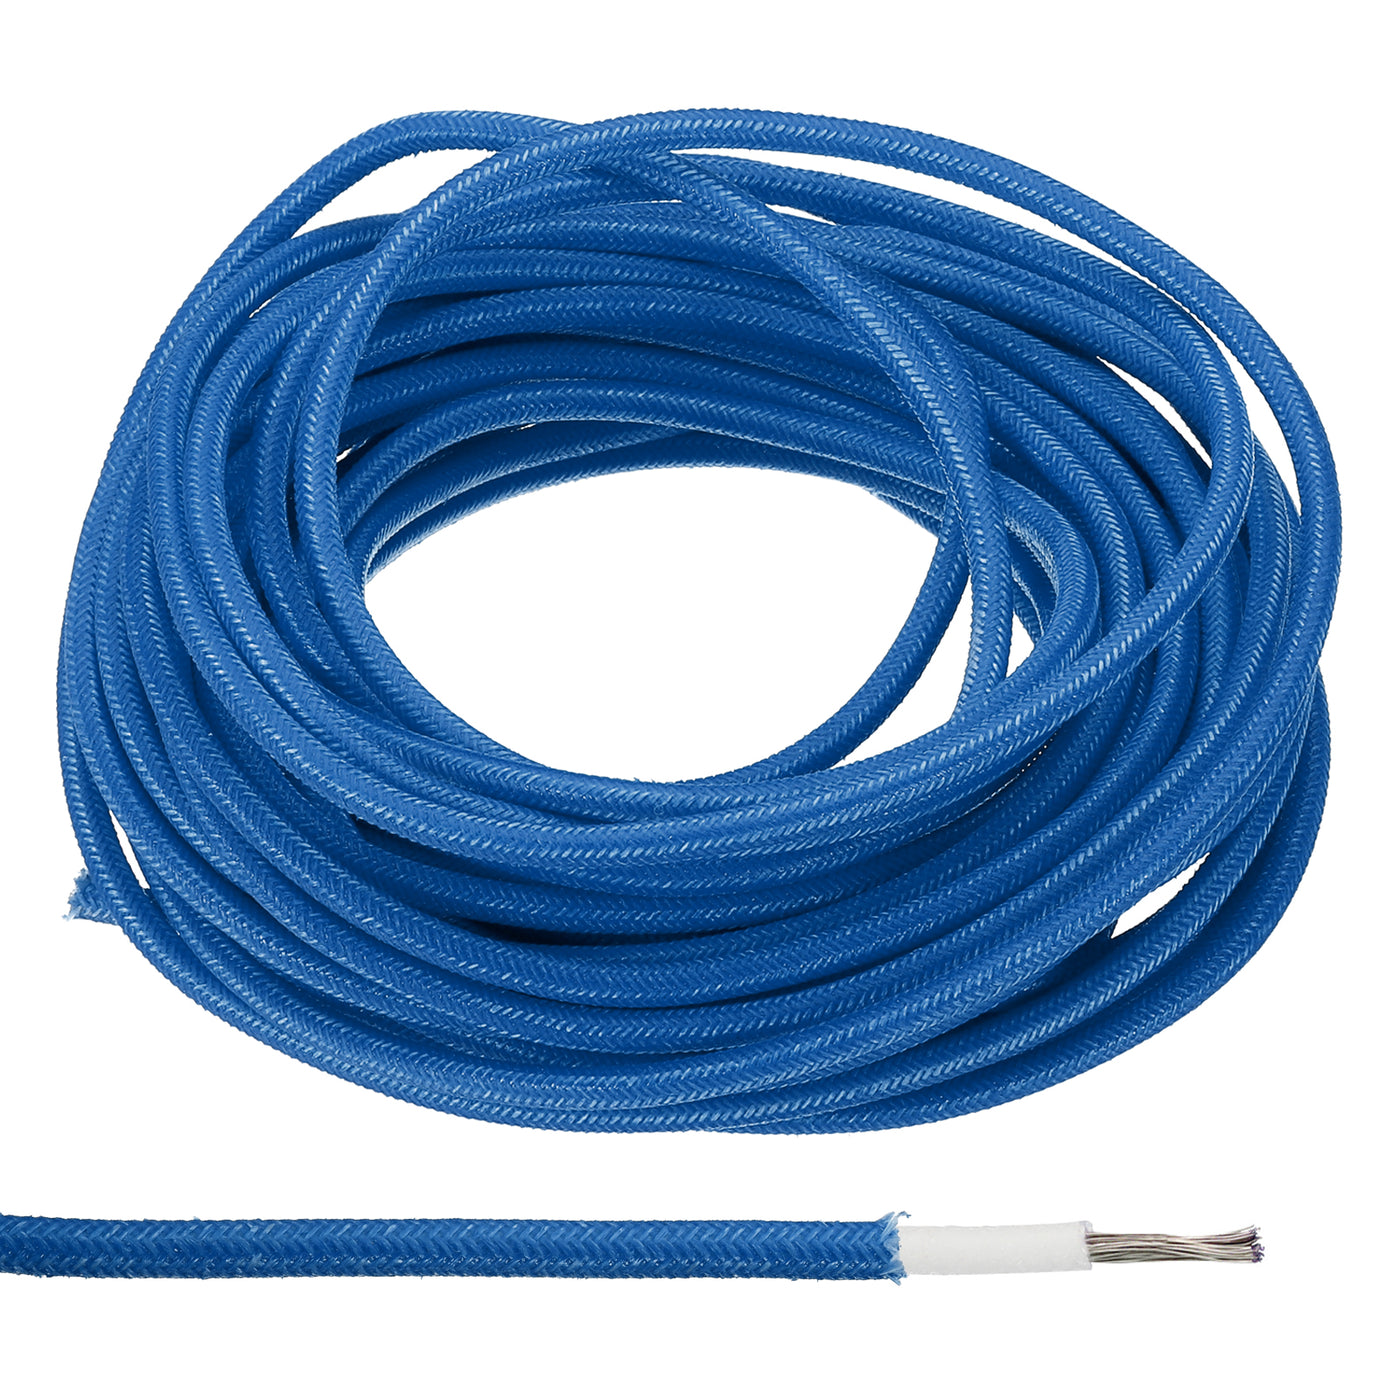 Harfington 16.4Ft 14AWG Electronic Wire, -30 to 200 Degree Celsius Insulated High Temperature Resistant Electrical Flexible Silicone Cable, Blue